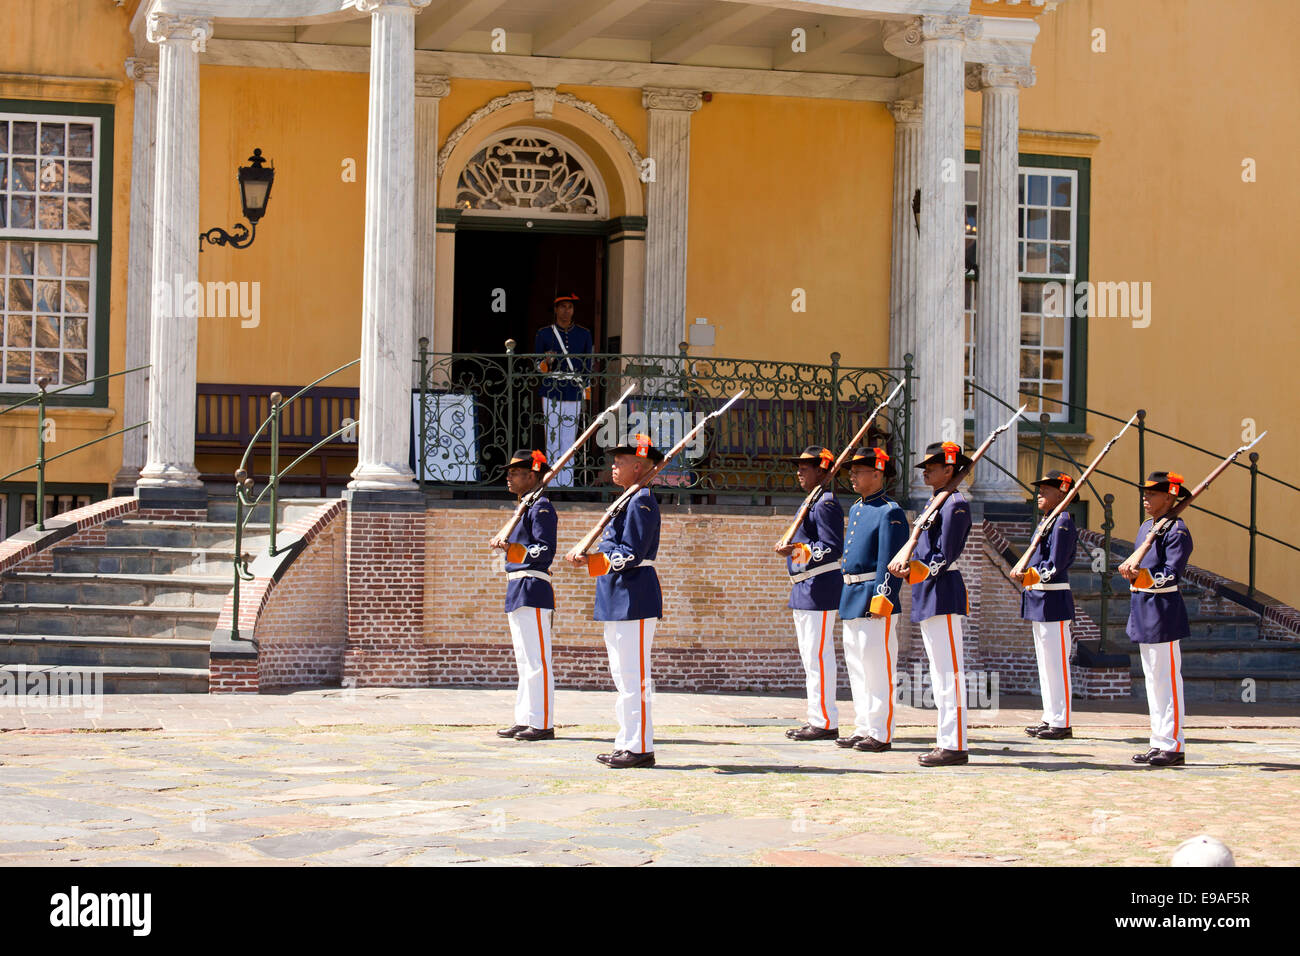 guards  in historic uniform during the Key Ceremony at the Castle of Good Hope,  Cape Town, Western Cape, South Africa Stock Photo